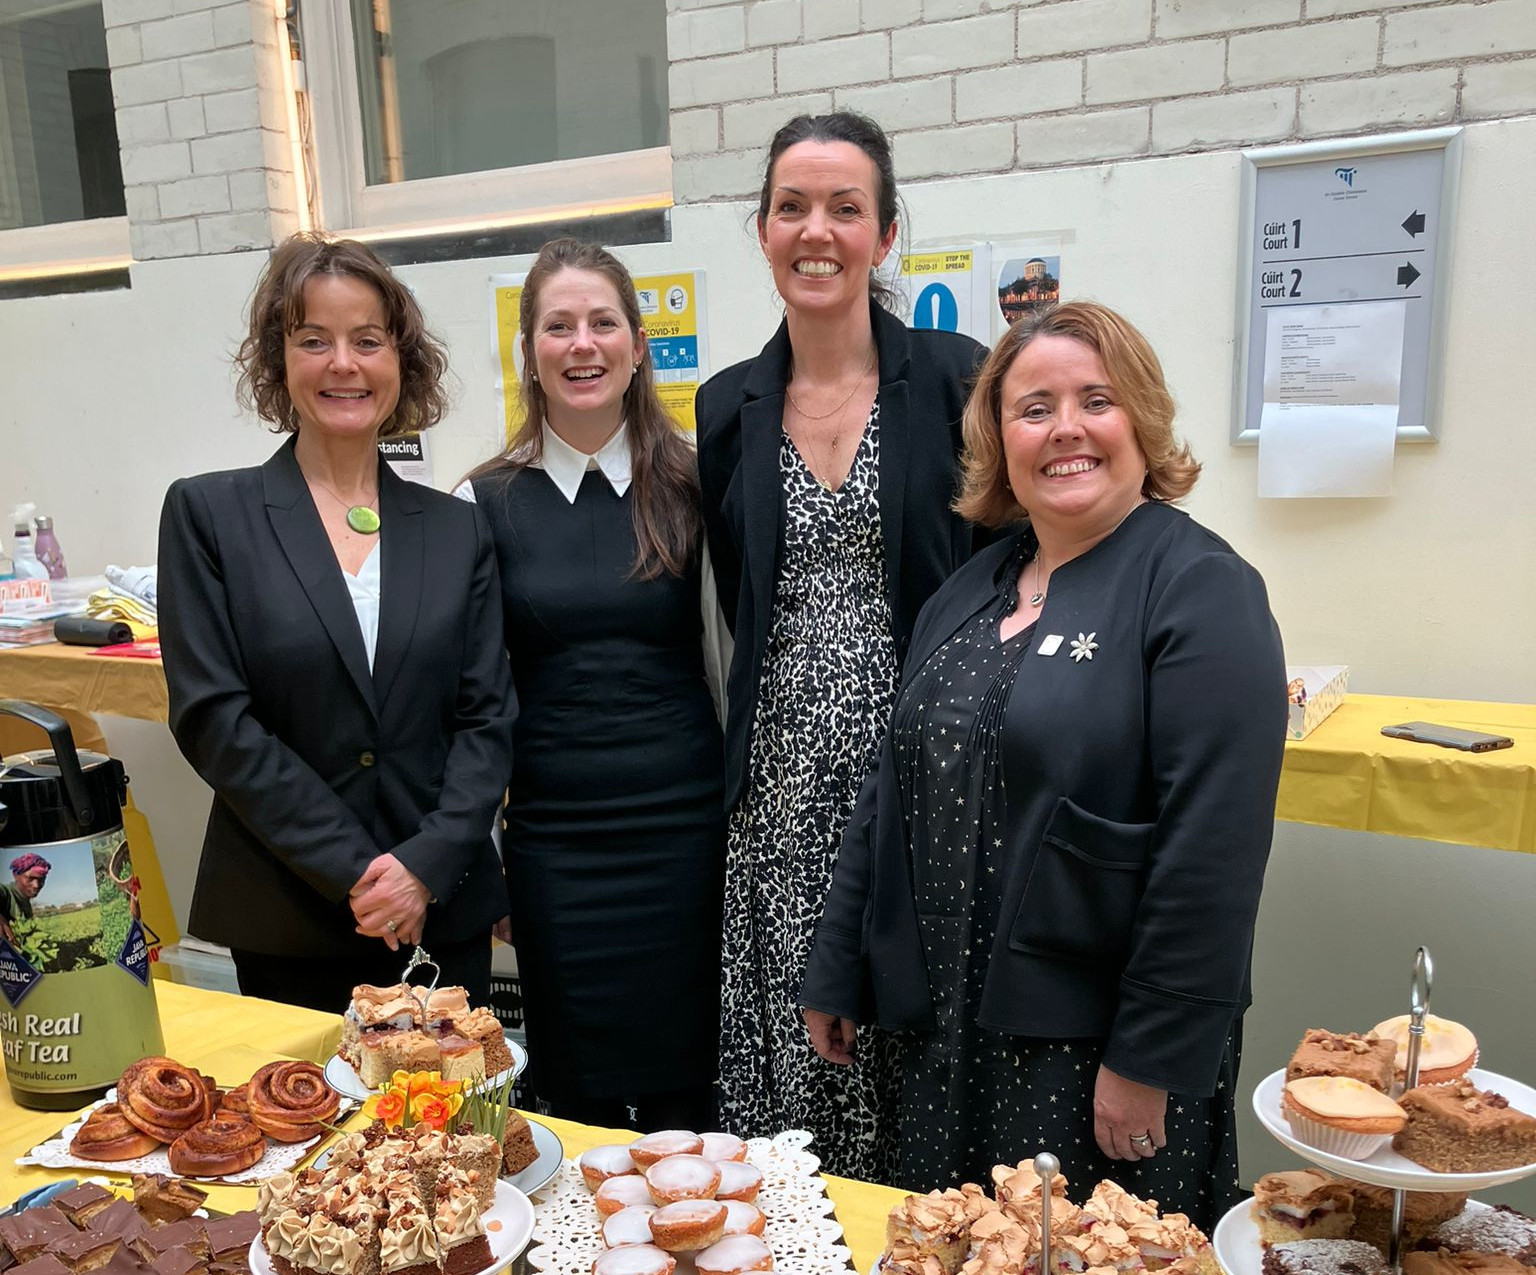 #InPictures: Memorial coffee morning raises over €8,000 for cancer charity